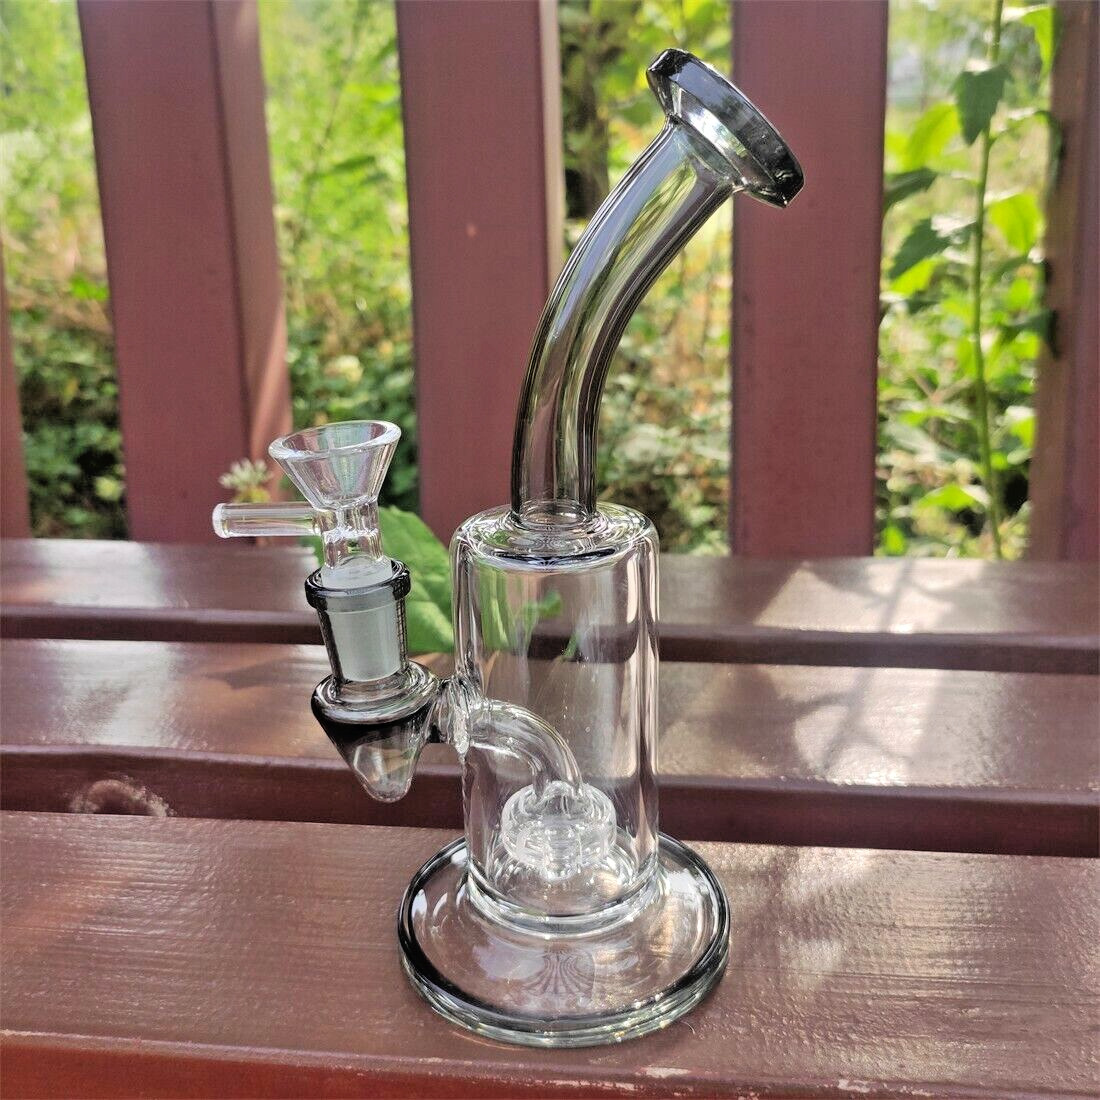 7 Clear&Black Glass Bong Bubbler Filter Water Bong Pipes Hookah 14mm Bowl. Available Now for 28.99